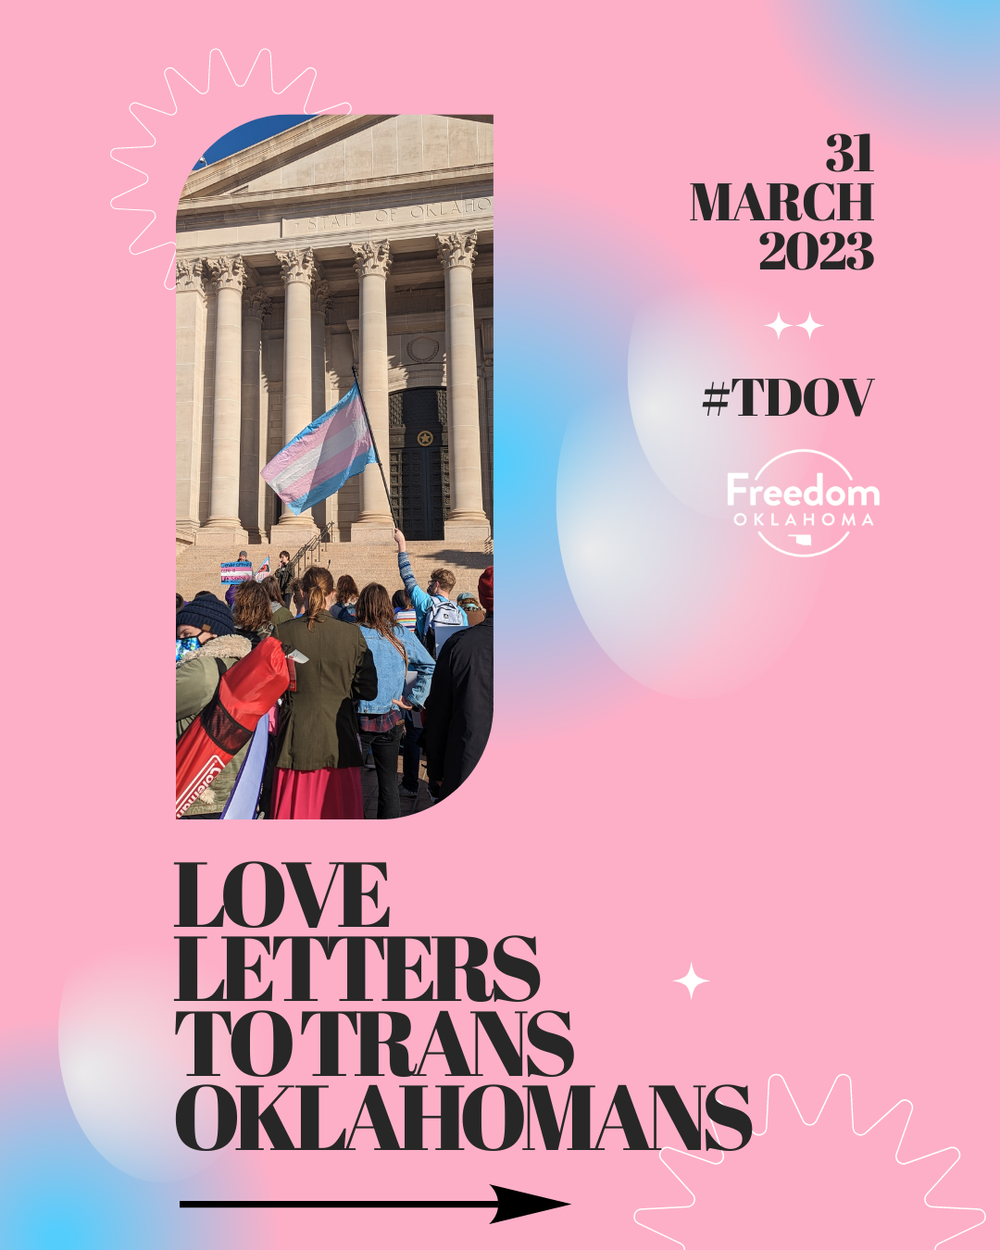  Pink background with blue and white gradient orbs throughout the image. Text: "Love Letters to Trans Oklahomans 31 March 2023 #TDOV" and an image of a trans rally at the Capitol. Someone is holding a trans pride flag in the air. 